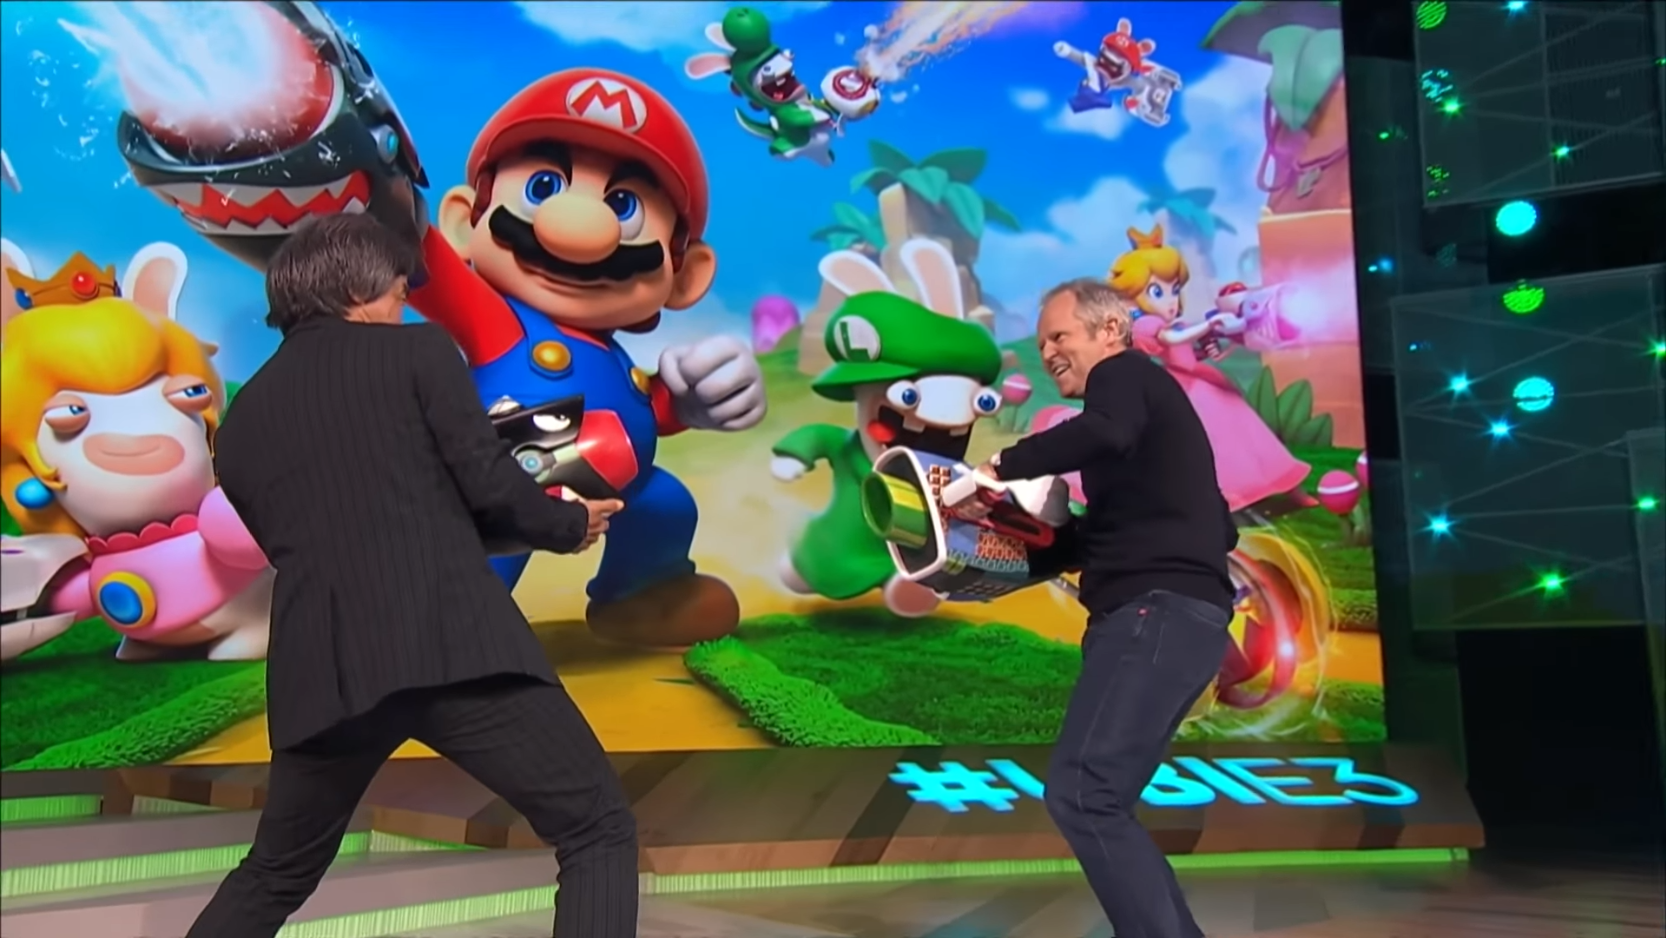 Yves Guillemot and Shigeru Miyamoto onstage at E3, Miyamoto holding an arm cannon that looks like a Bullet Bill pointed at Guillemot, who holds his own oversized blaster, as they stand in front of a screen featuring Mario, Luigi, and the tired looking Rabbids all holding their own firearms